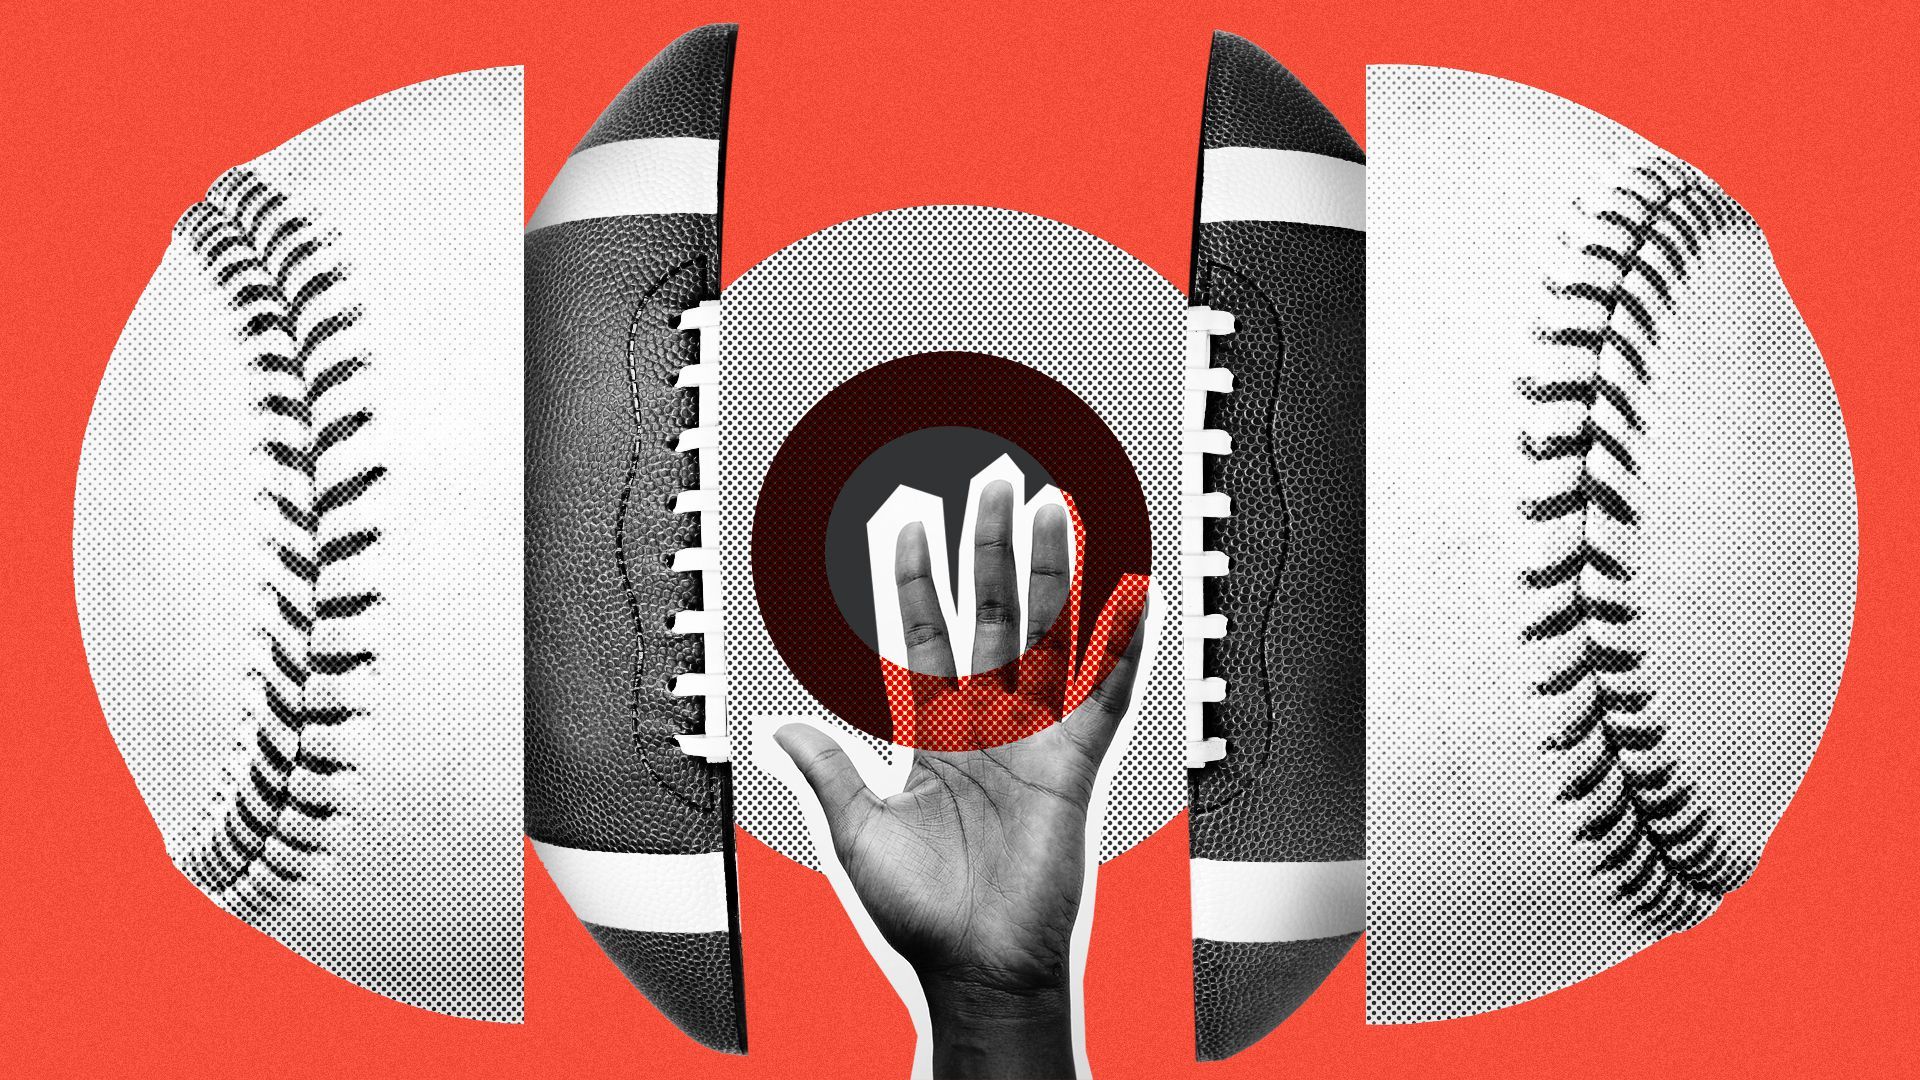 Illustrated collage of a hand inside of a football and baseball.